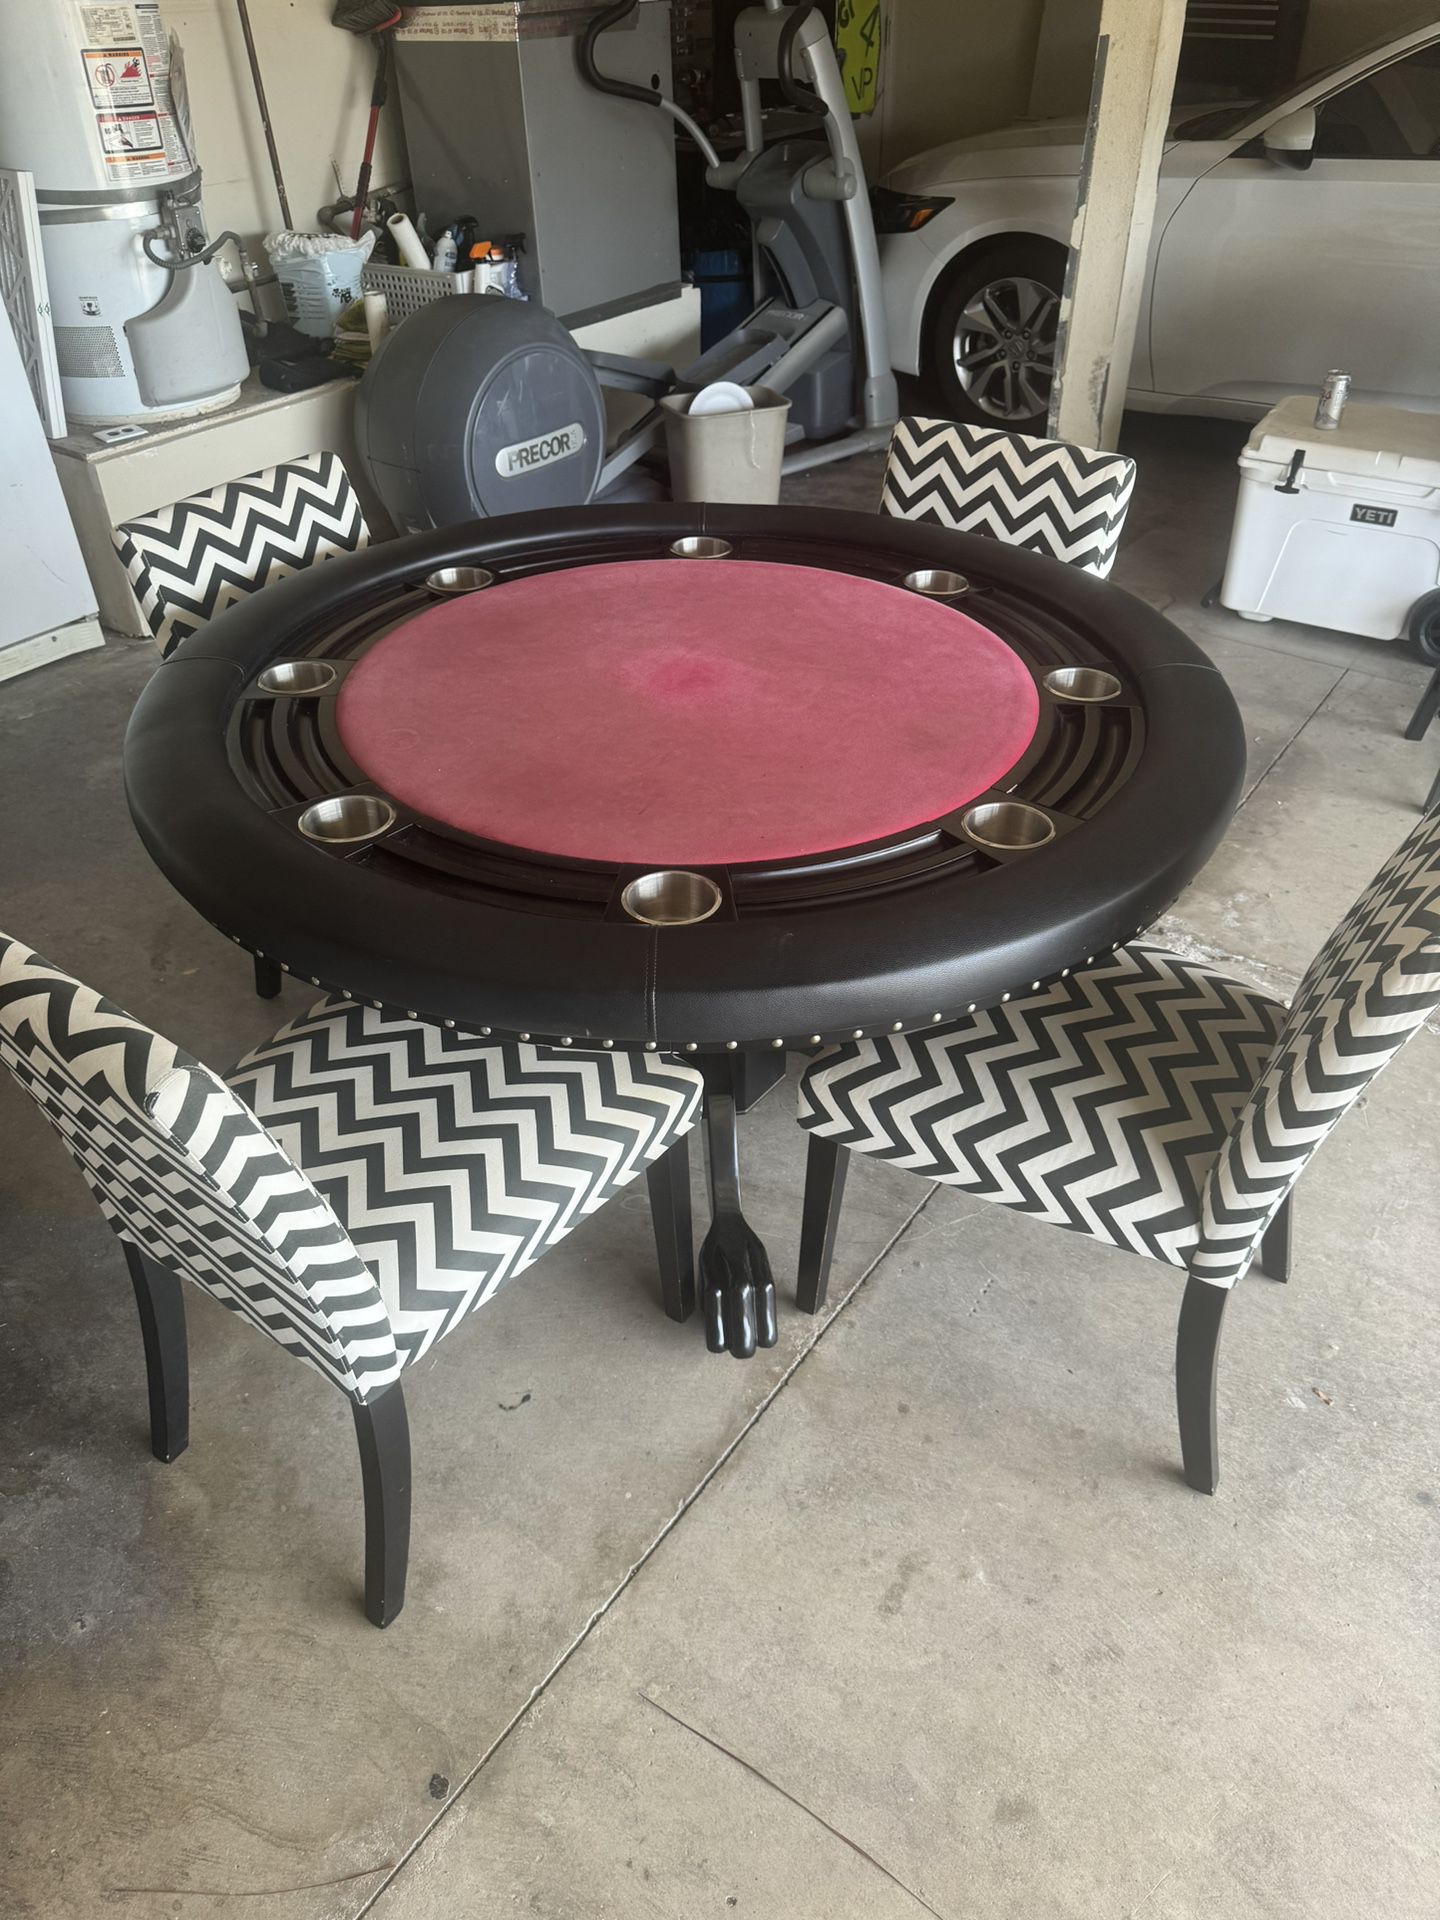 Poker Table With Chairs & Poker chips